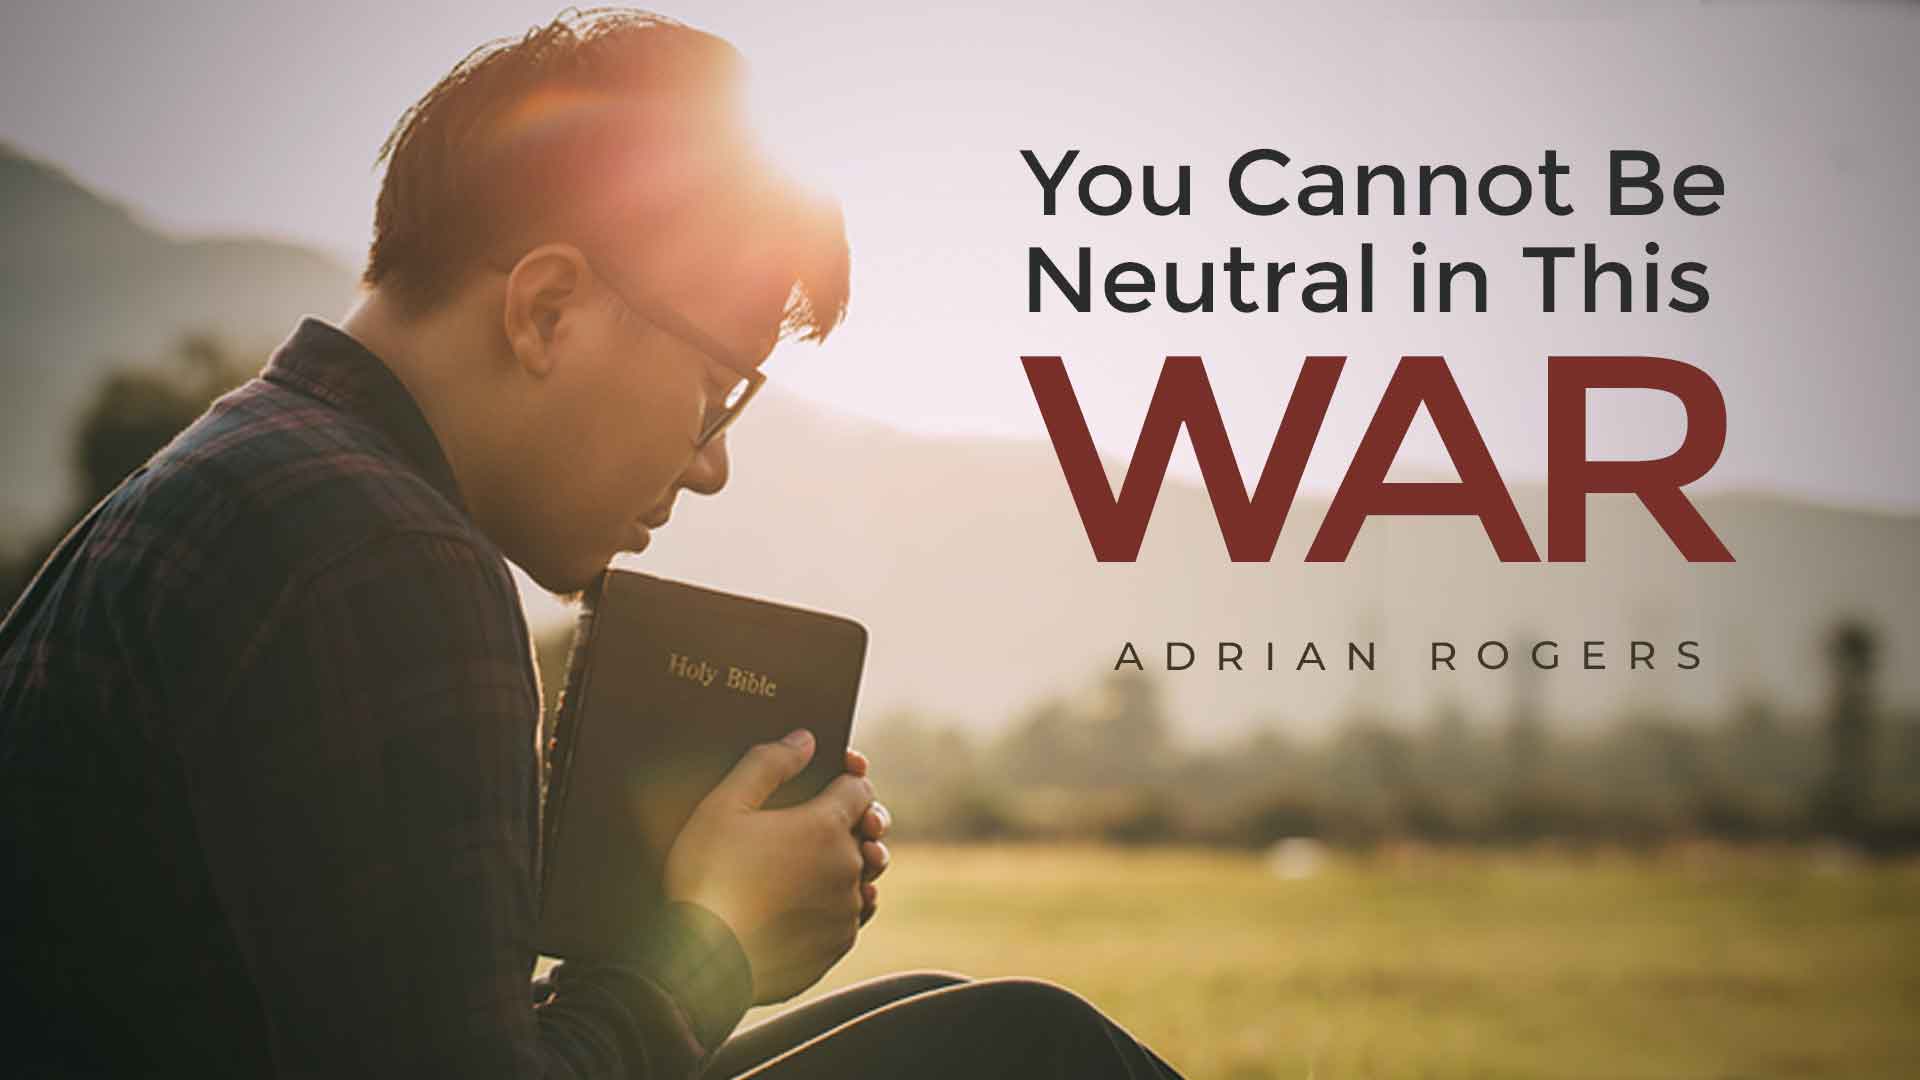 You Cannot Be Neutral in This War 1920x1080